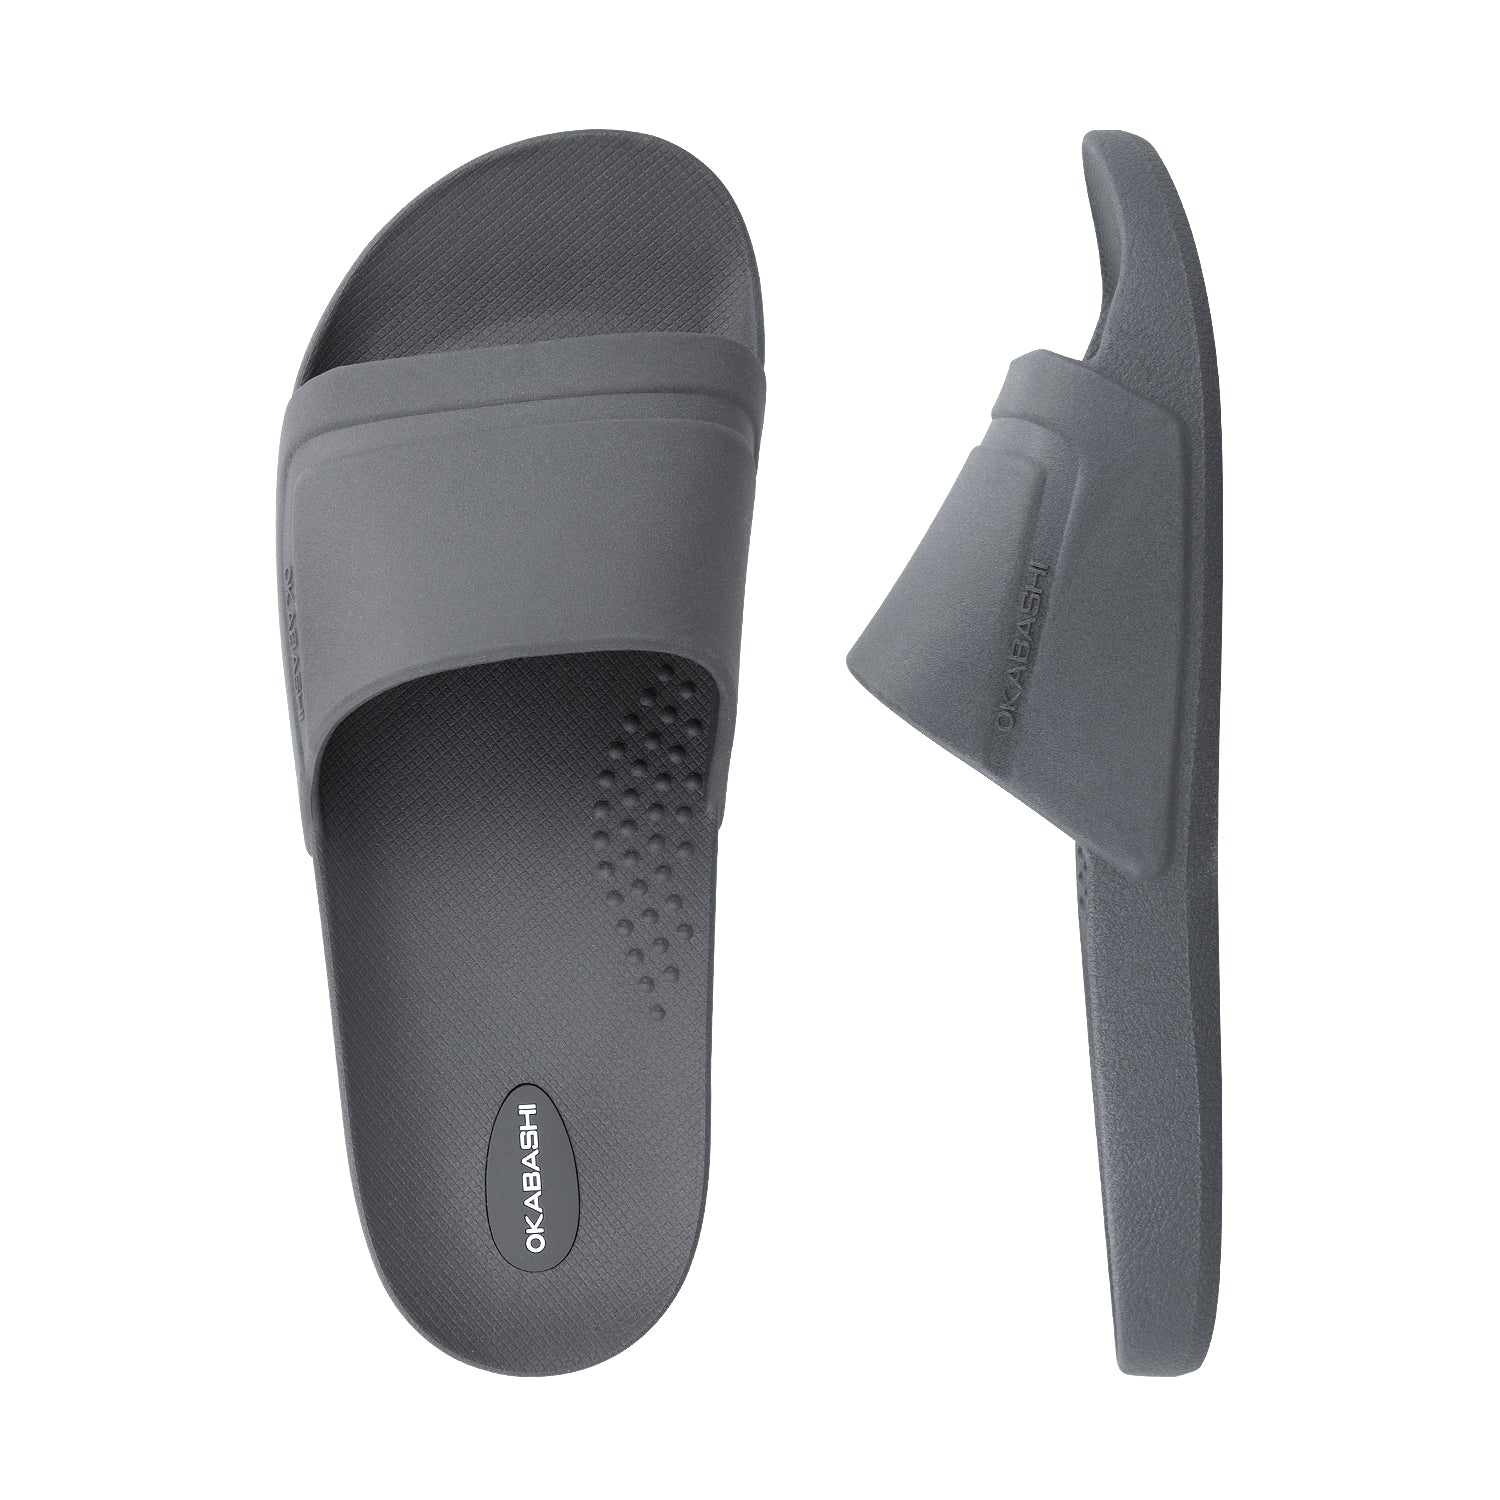 leather chappal for men|leather slipper for men|chappal men|slippers for men |chappals for men|slippers for men leather|thong slippers for men|mens  leather slippers|khadau chappal for men|stitched-6 : Amazon.in: Shoes &  Handbags